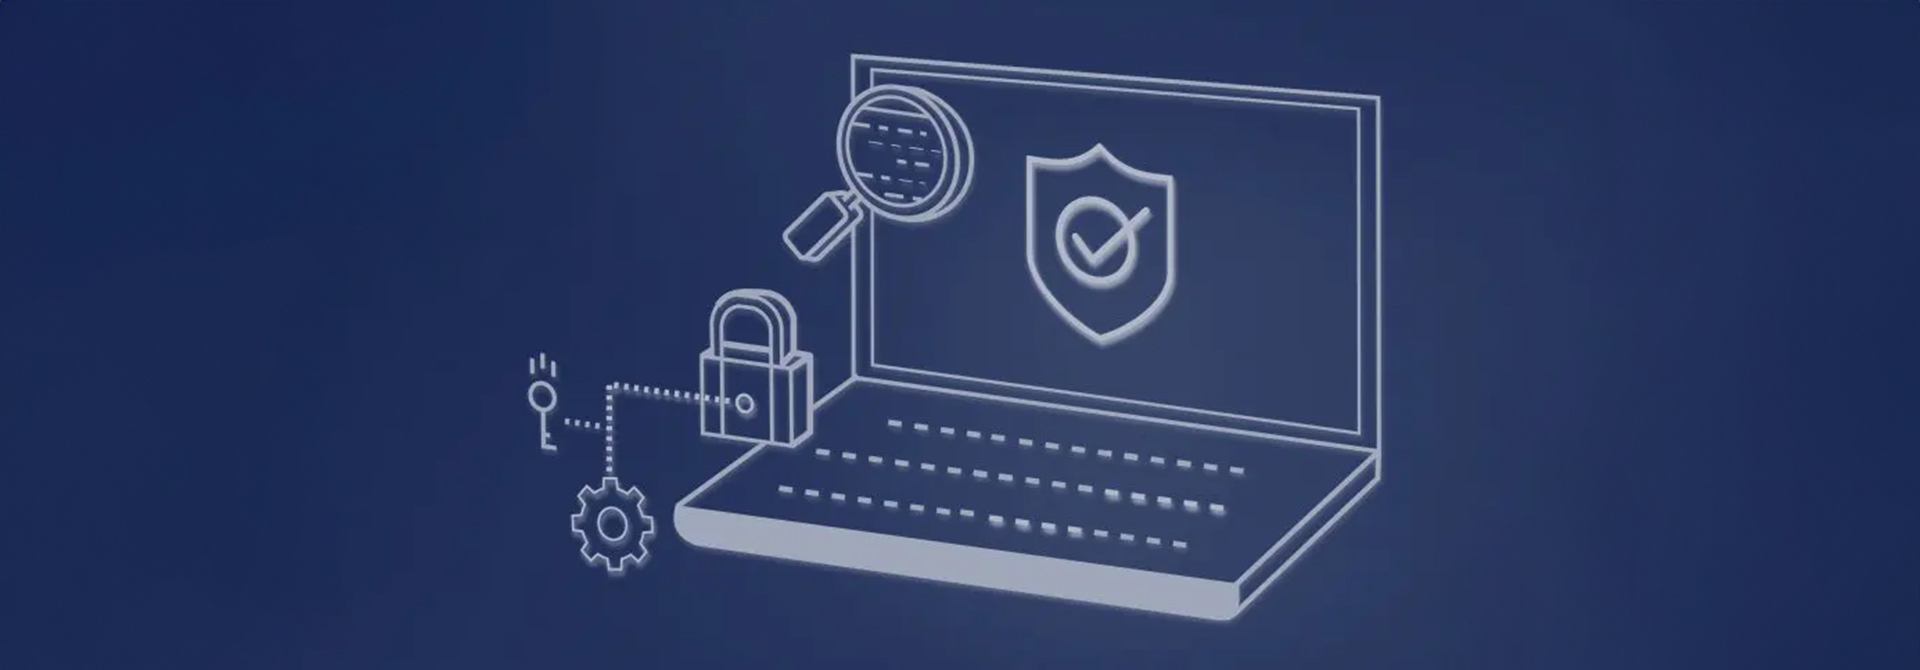 Protect your most trusted assets by starting below the OS